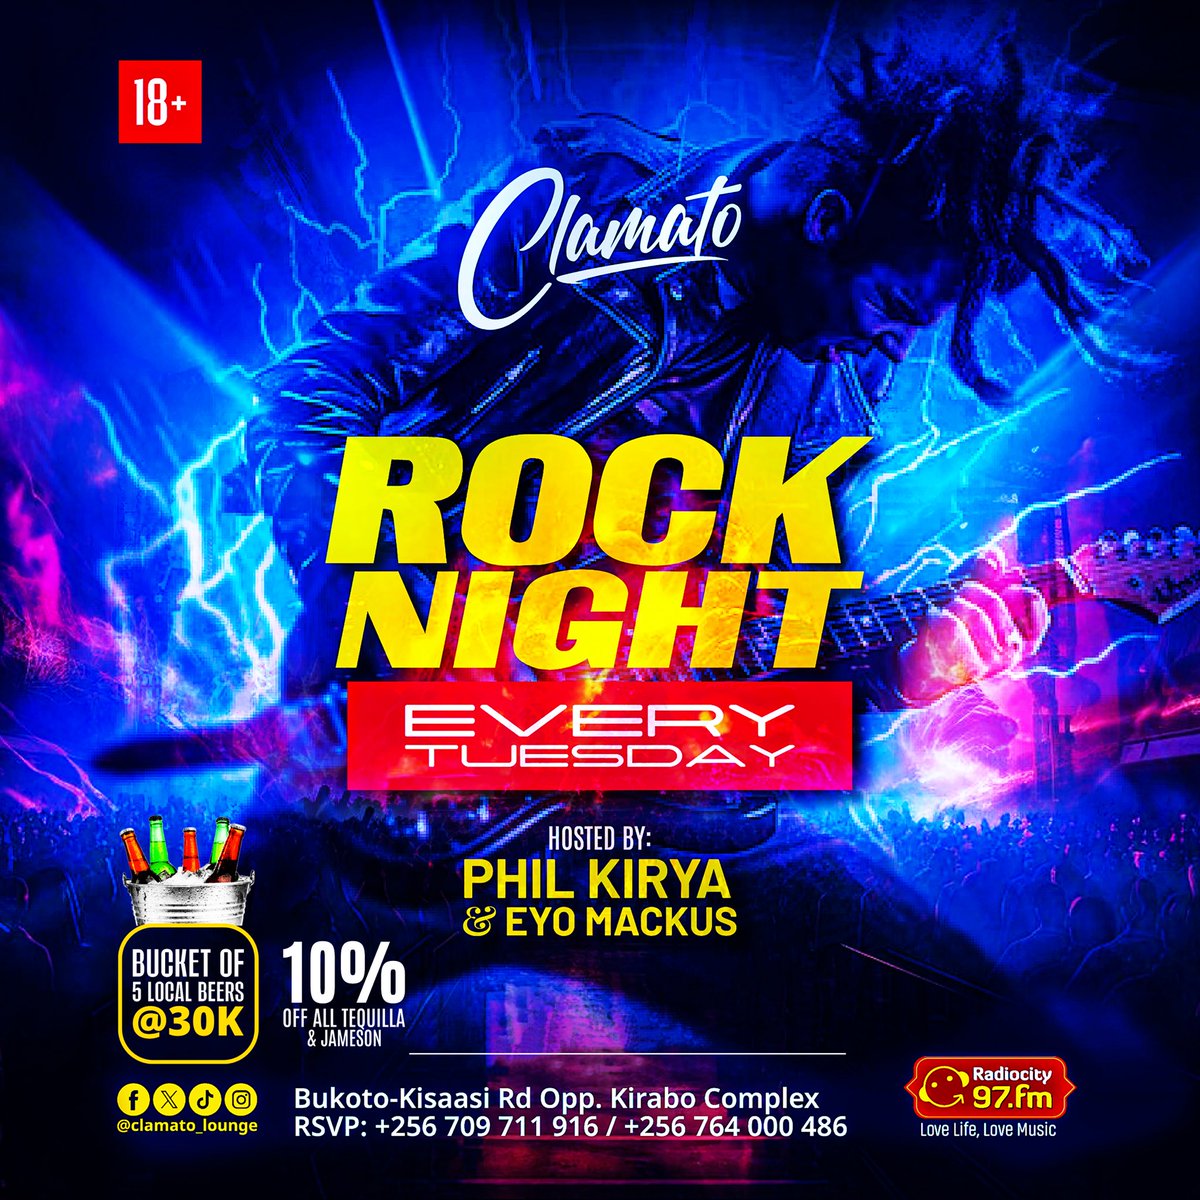 We are warming up for tonight’s rock night at Clamato, and they have a great offer of 5 beers at only 30k.
Listen to some rock music 
#ClamatoRockTuesdays